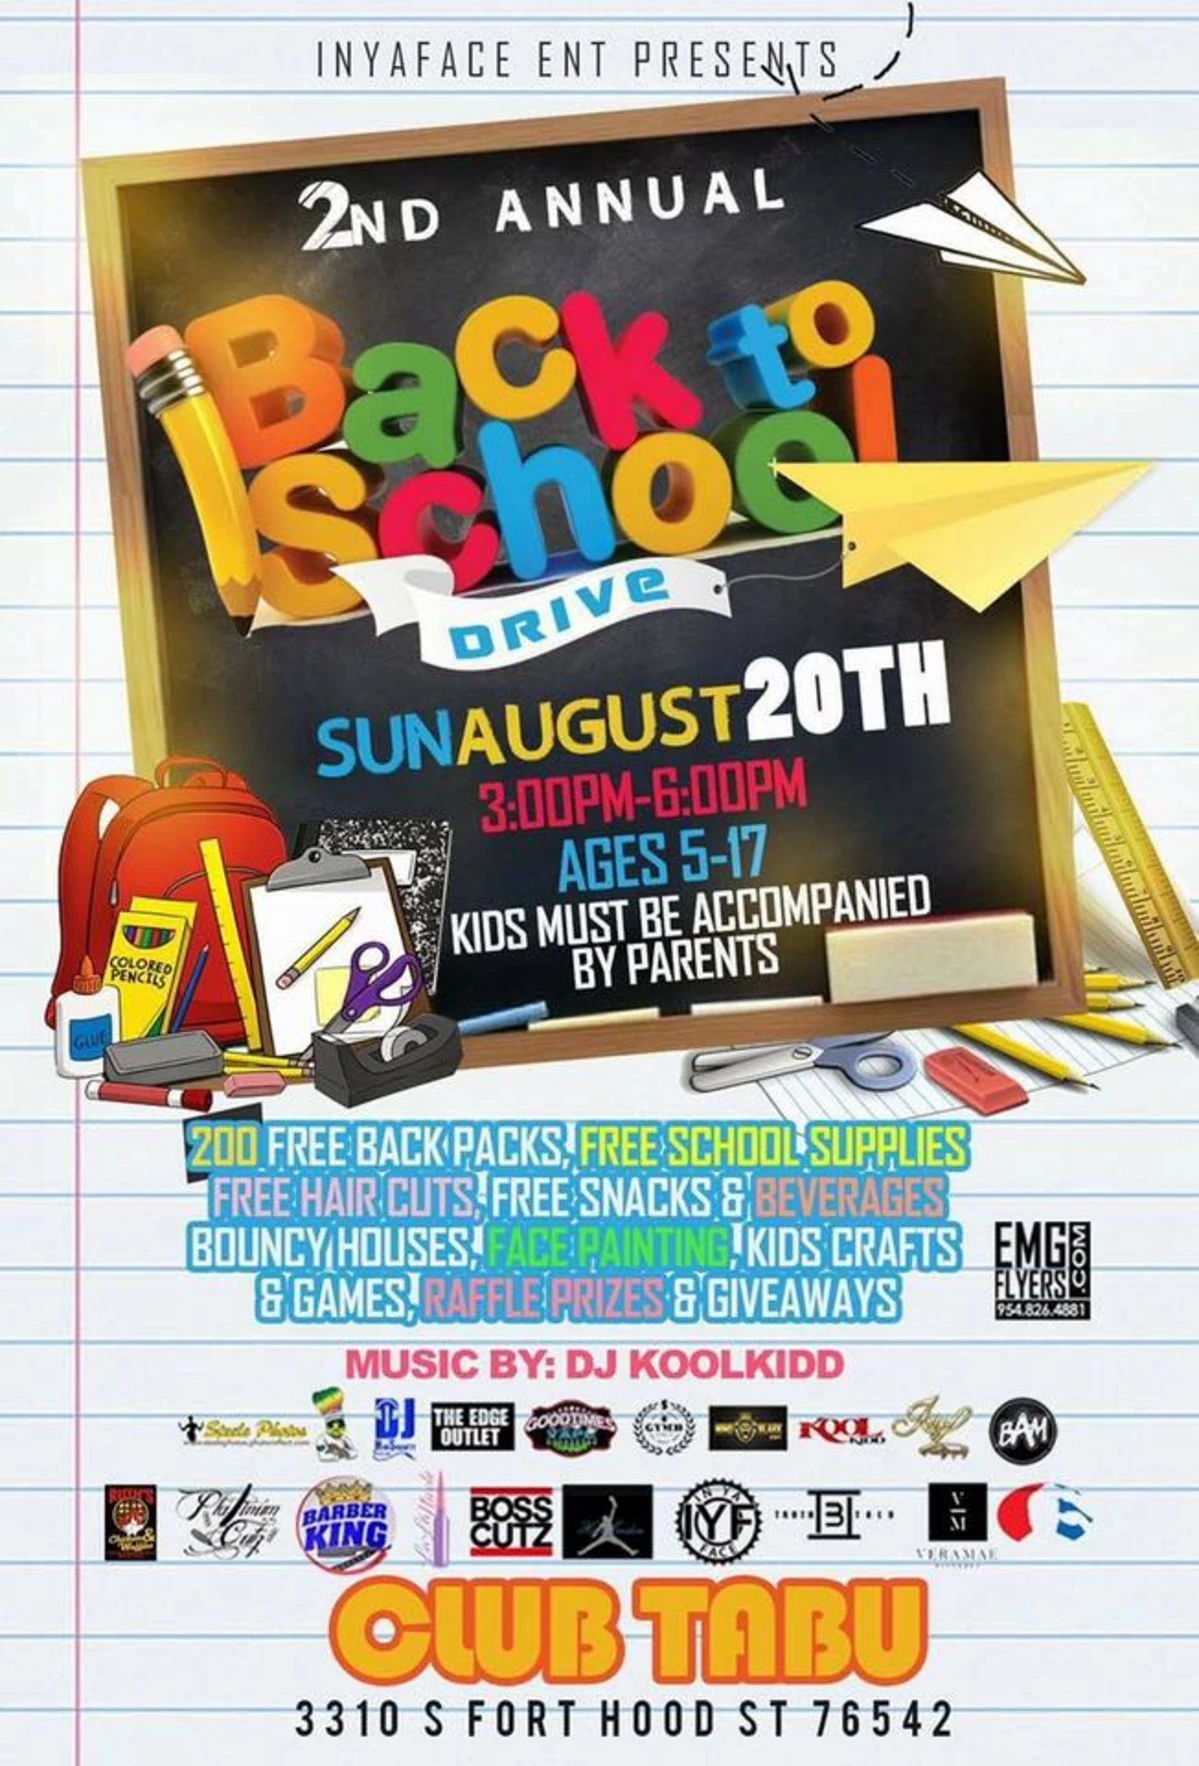 InYaFace Ent Presents 'The 2nd Annual Back To School Drive'